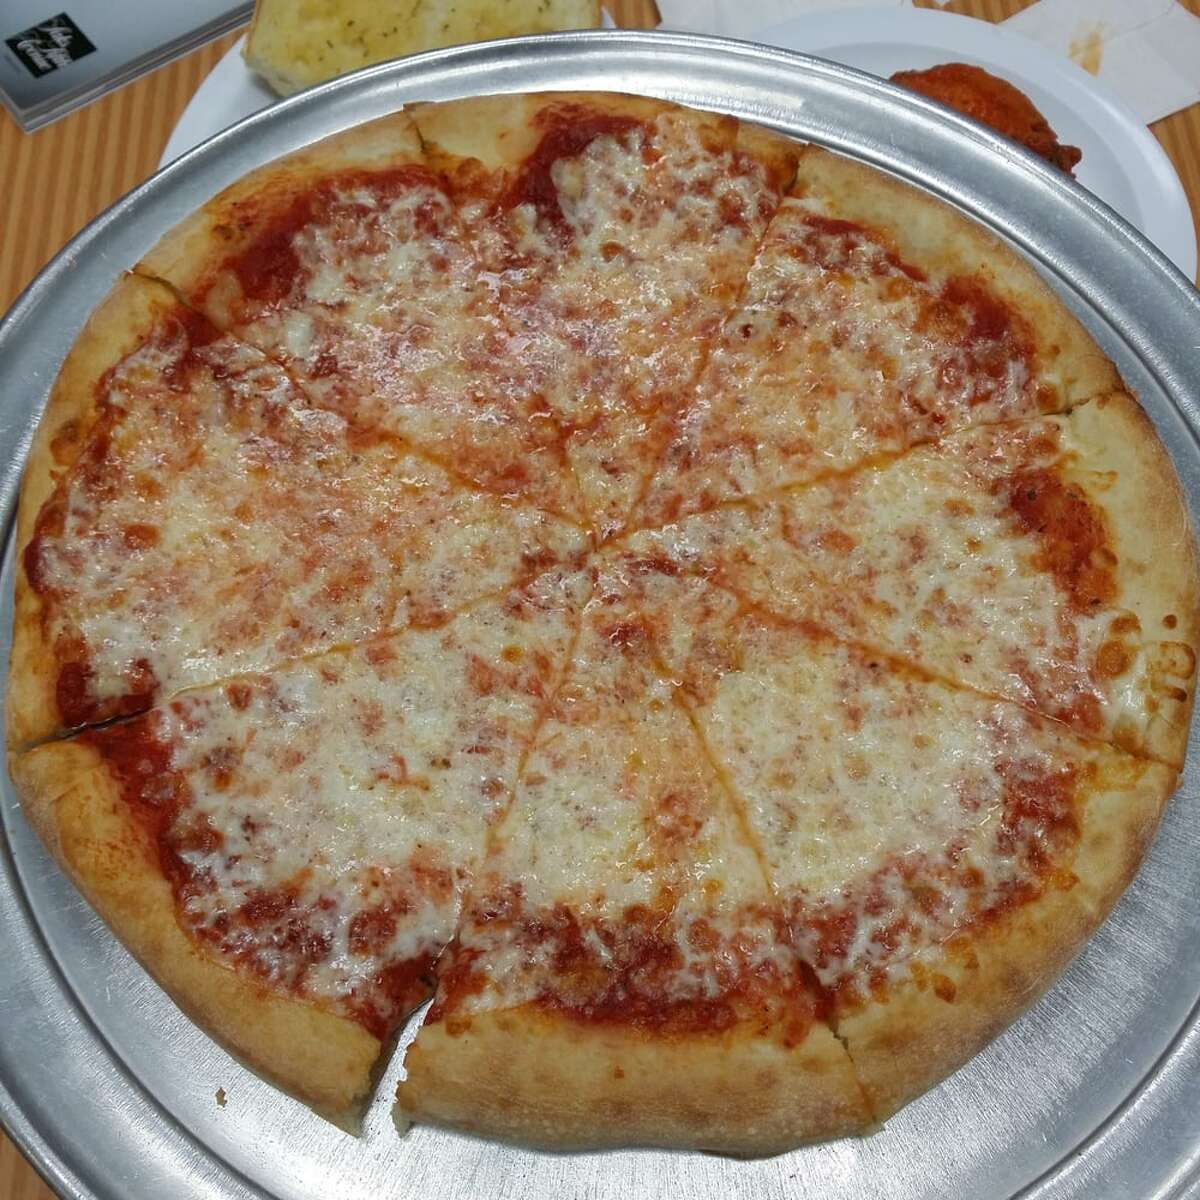 Brother’s Pizzeria Yelp rating: 4.5 stars Where: 1029 Hwy 6 N, Ste 100 Photo: J C./Yelp